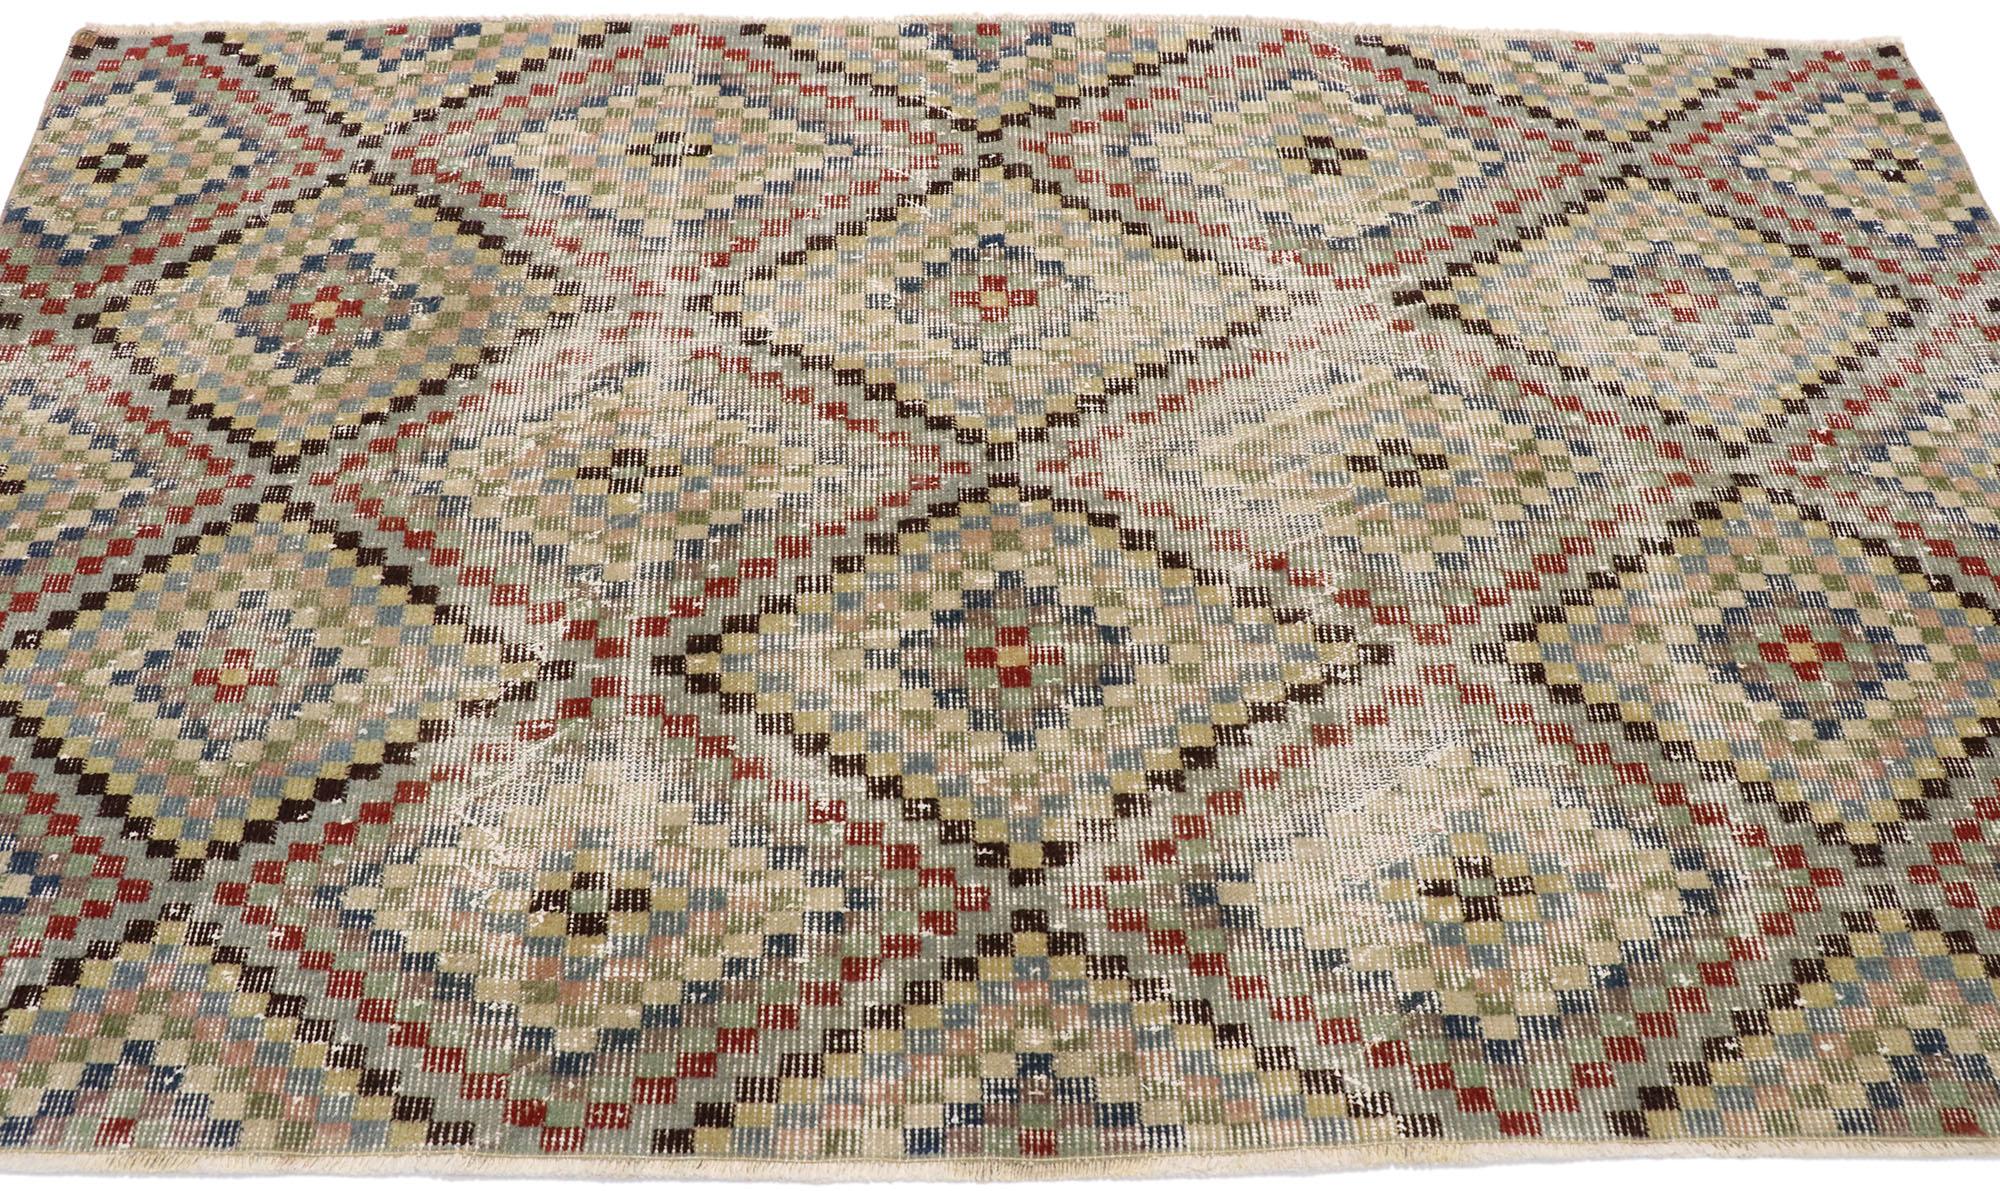 Distressed Vintage Turkish Sivas Rug with Rustic Mid-Century Modern Cubist Style In Distressed Condition For Sale In Dallas, TX